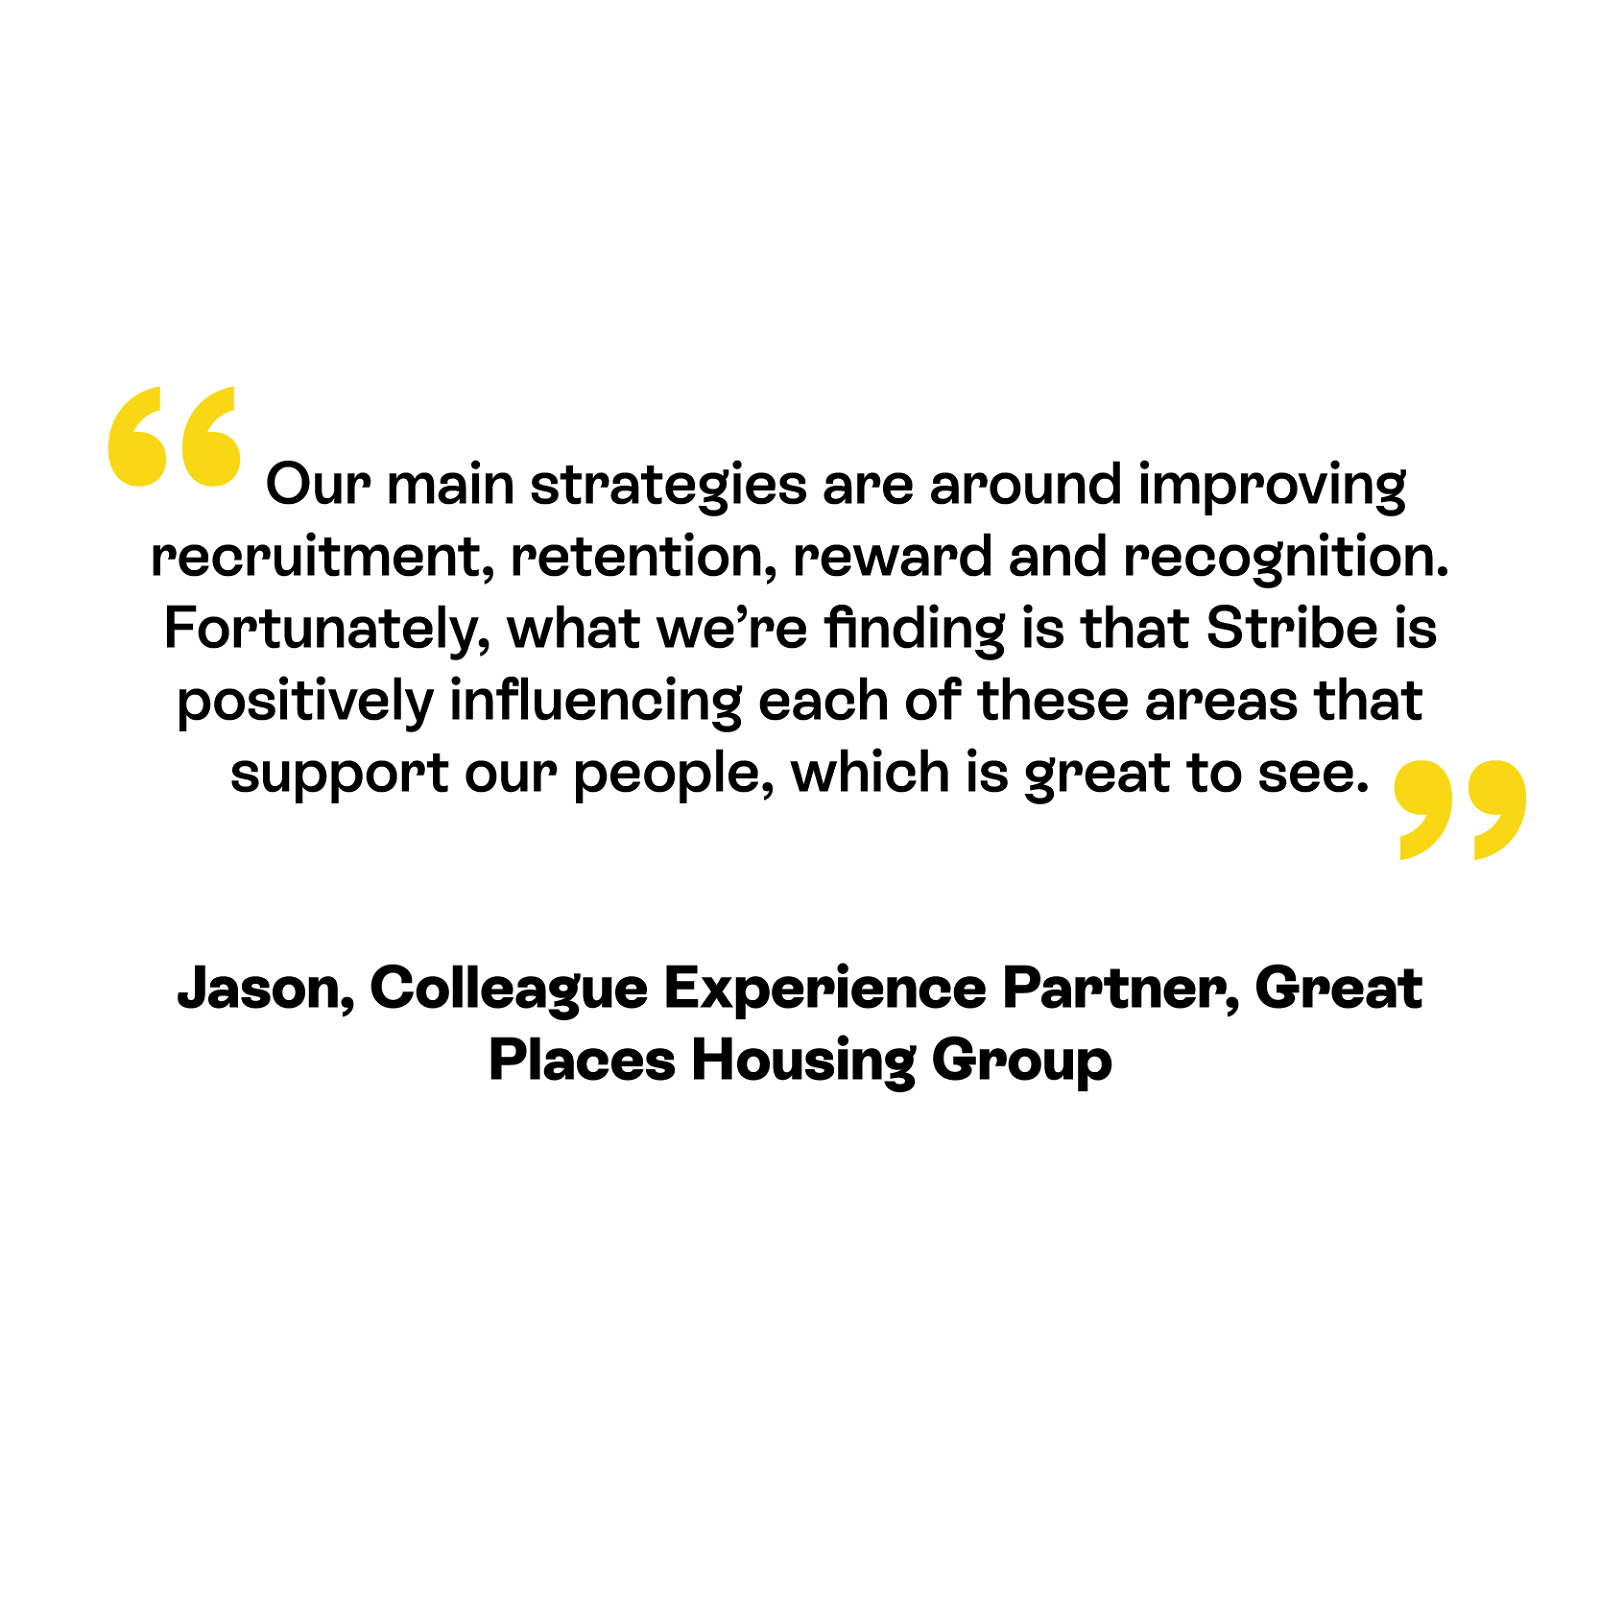 A positive testimonial for Stribe from a manager at Great Places.